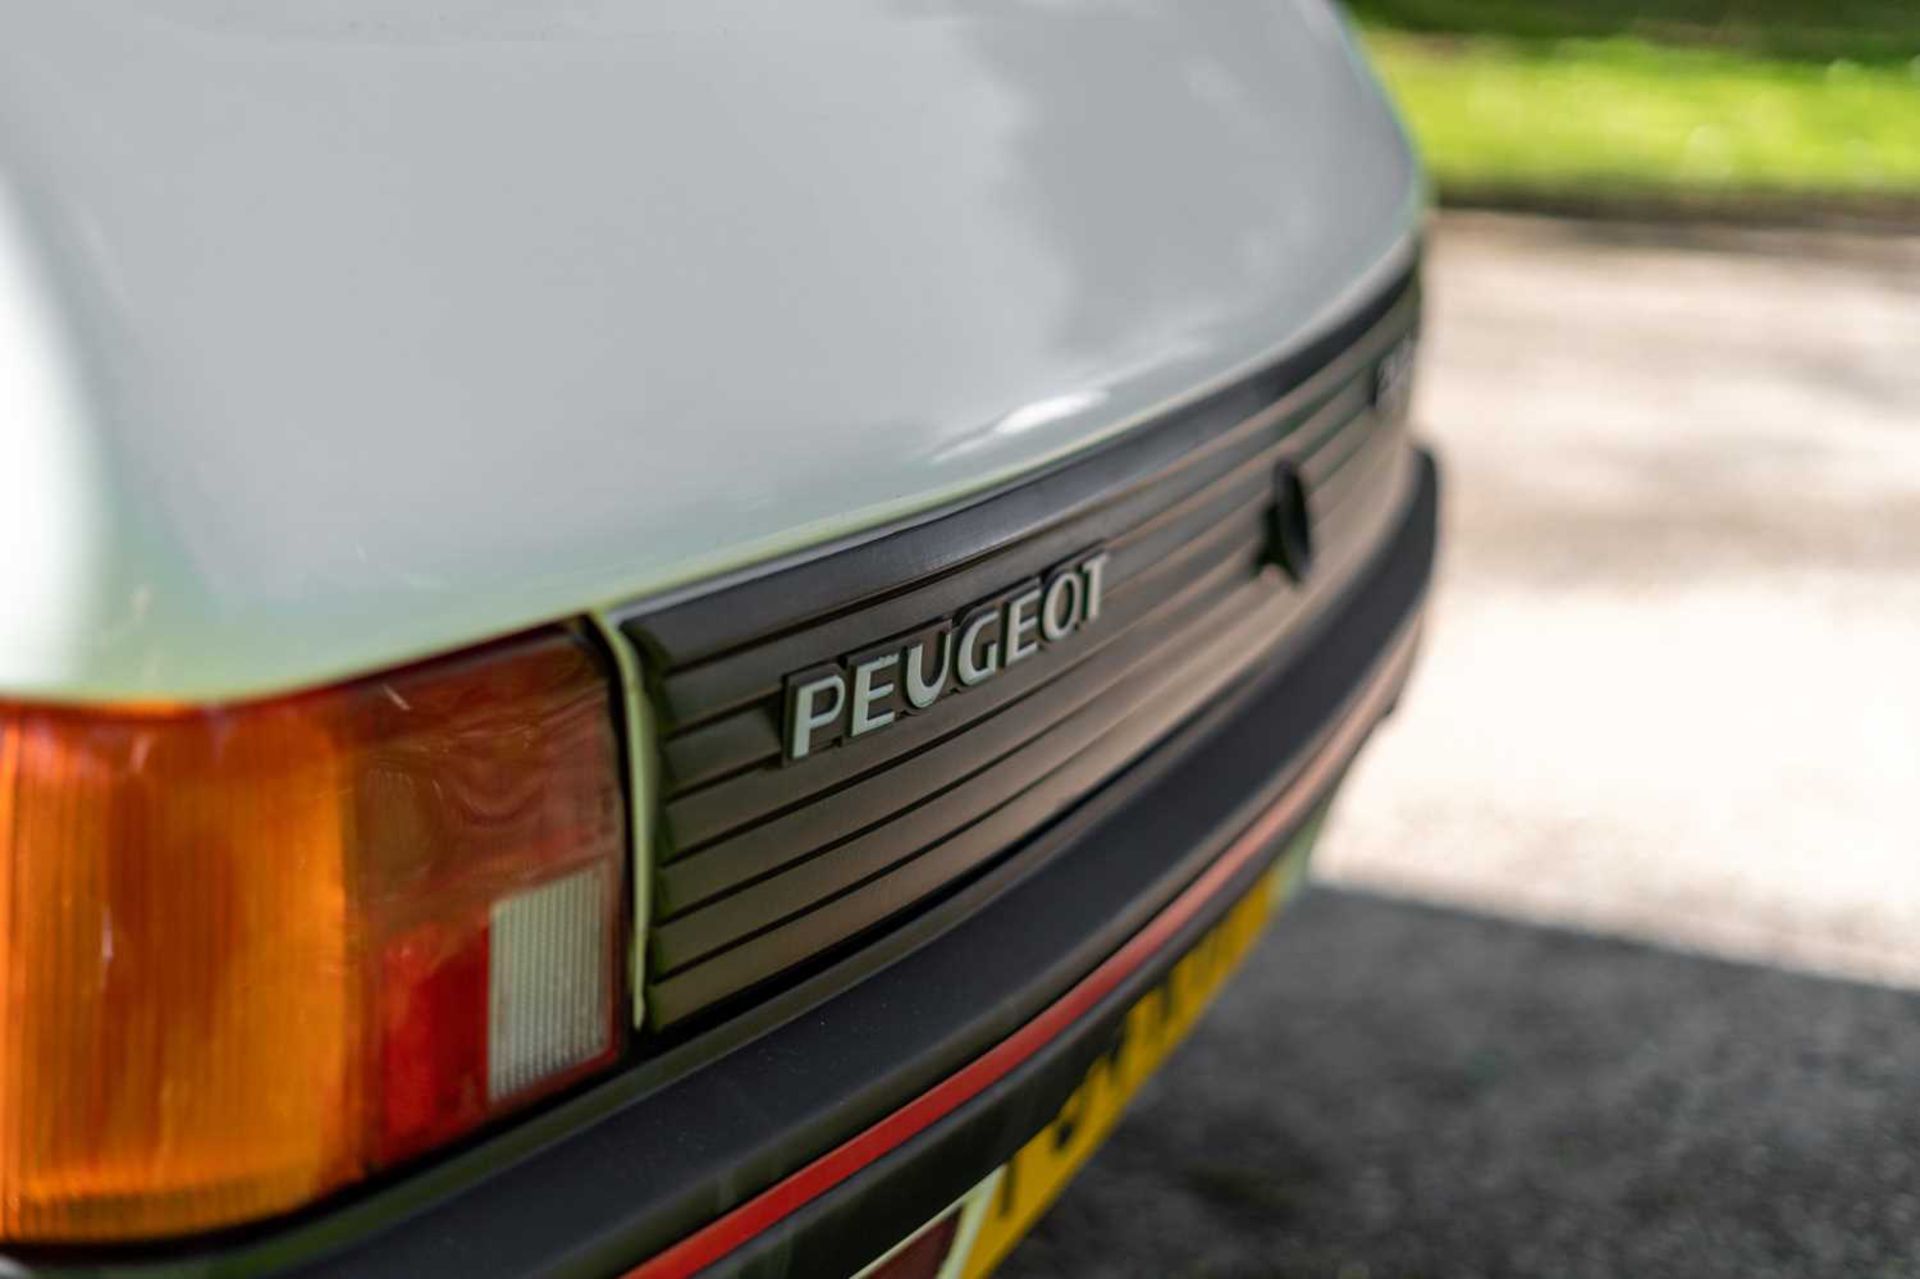 1989 Peugeot 205 GTi 1.6 The subject of much recent expenditure *** NO RESERVE *** - Image 31 of 59